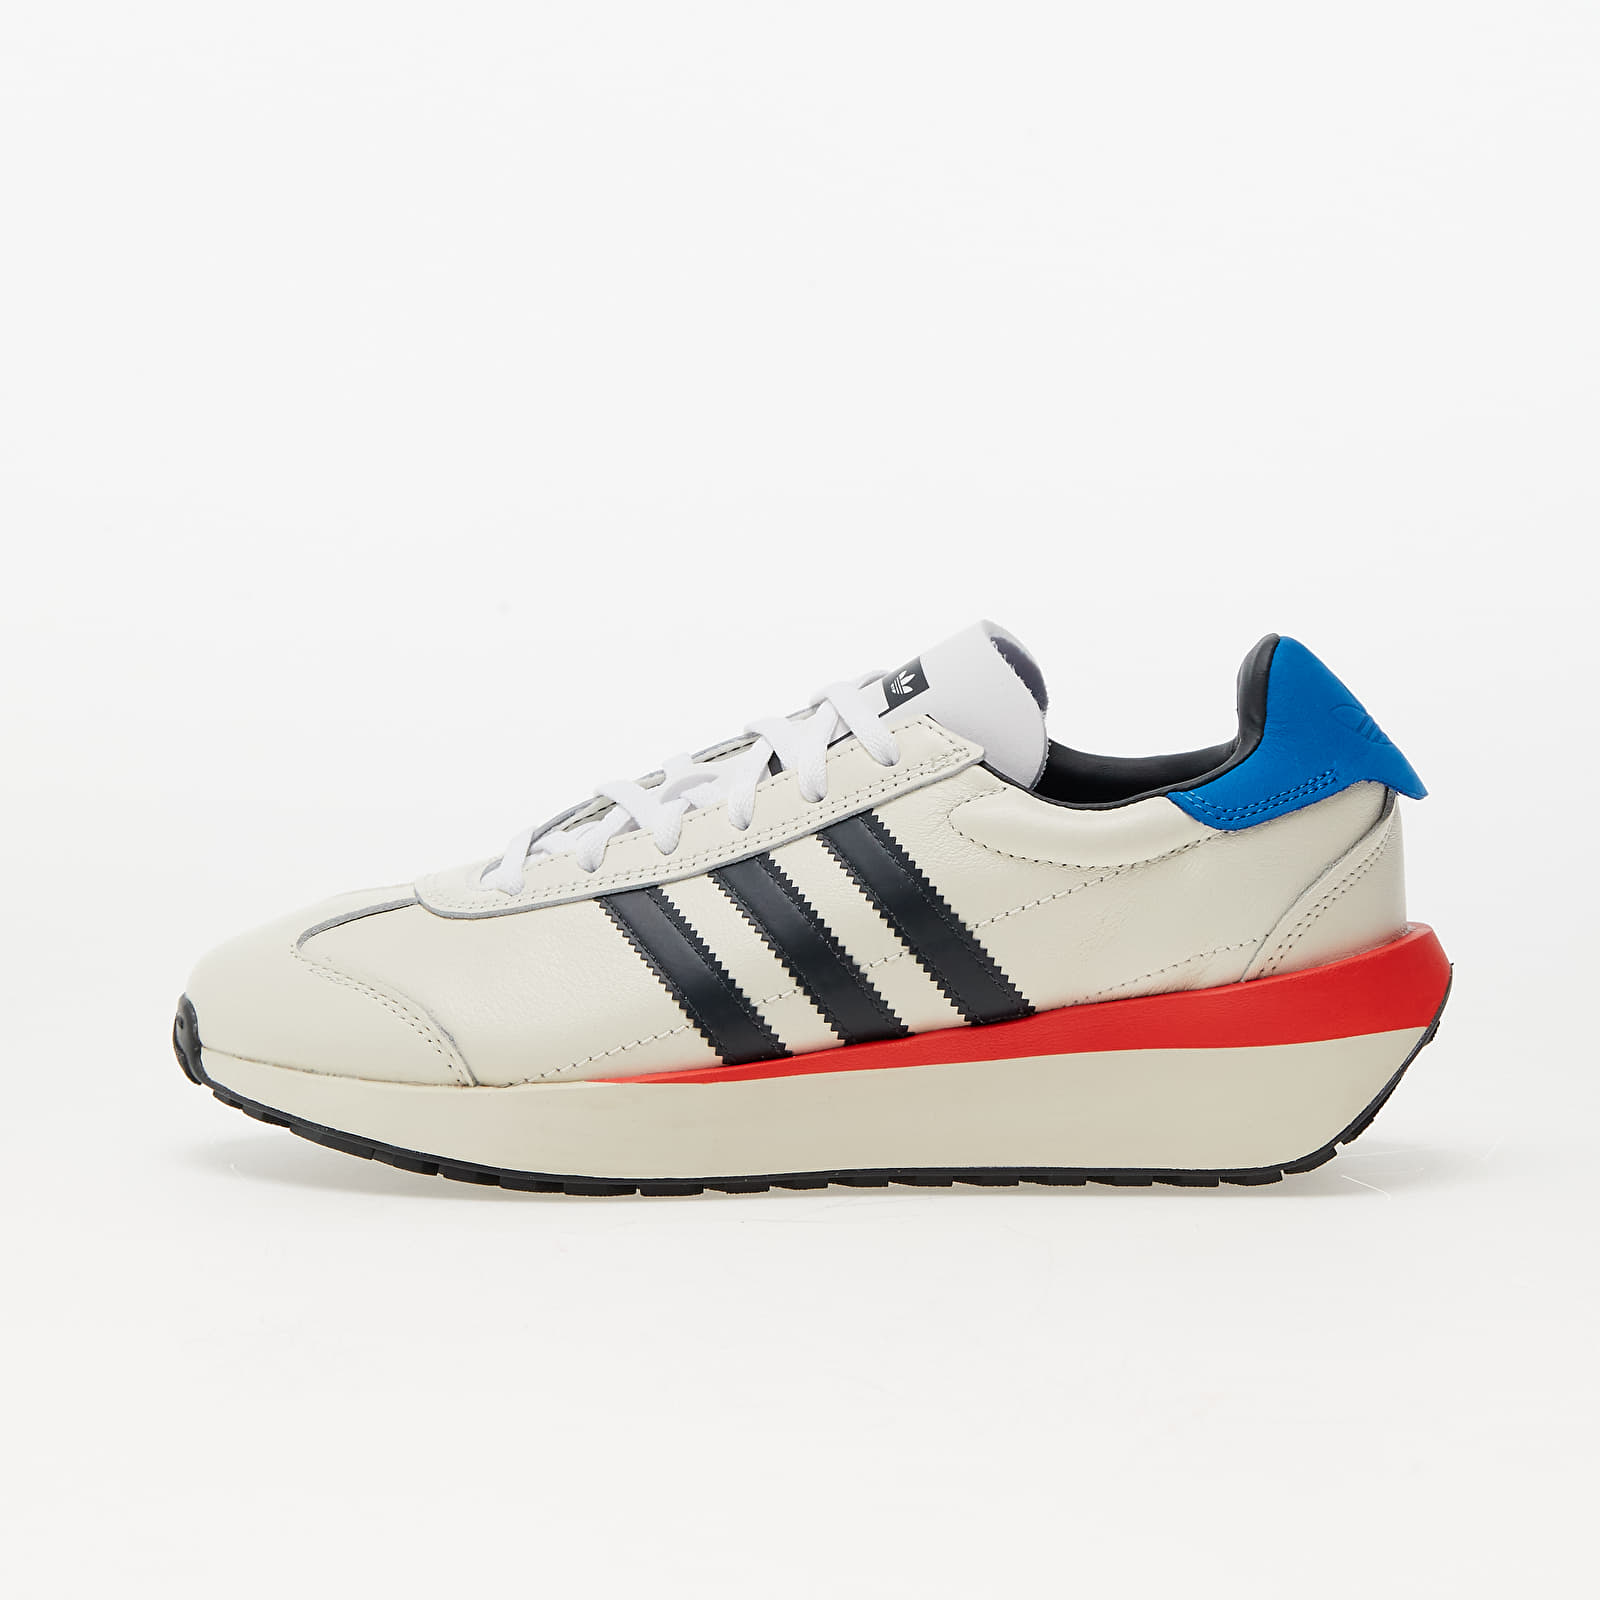 Chaussures et baskets homme adidas Country Xlg Off White/ Carbon/ Blue Bird